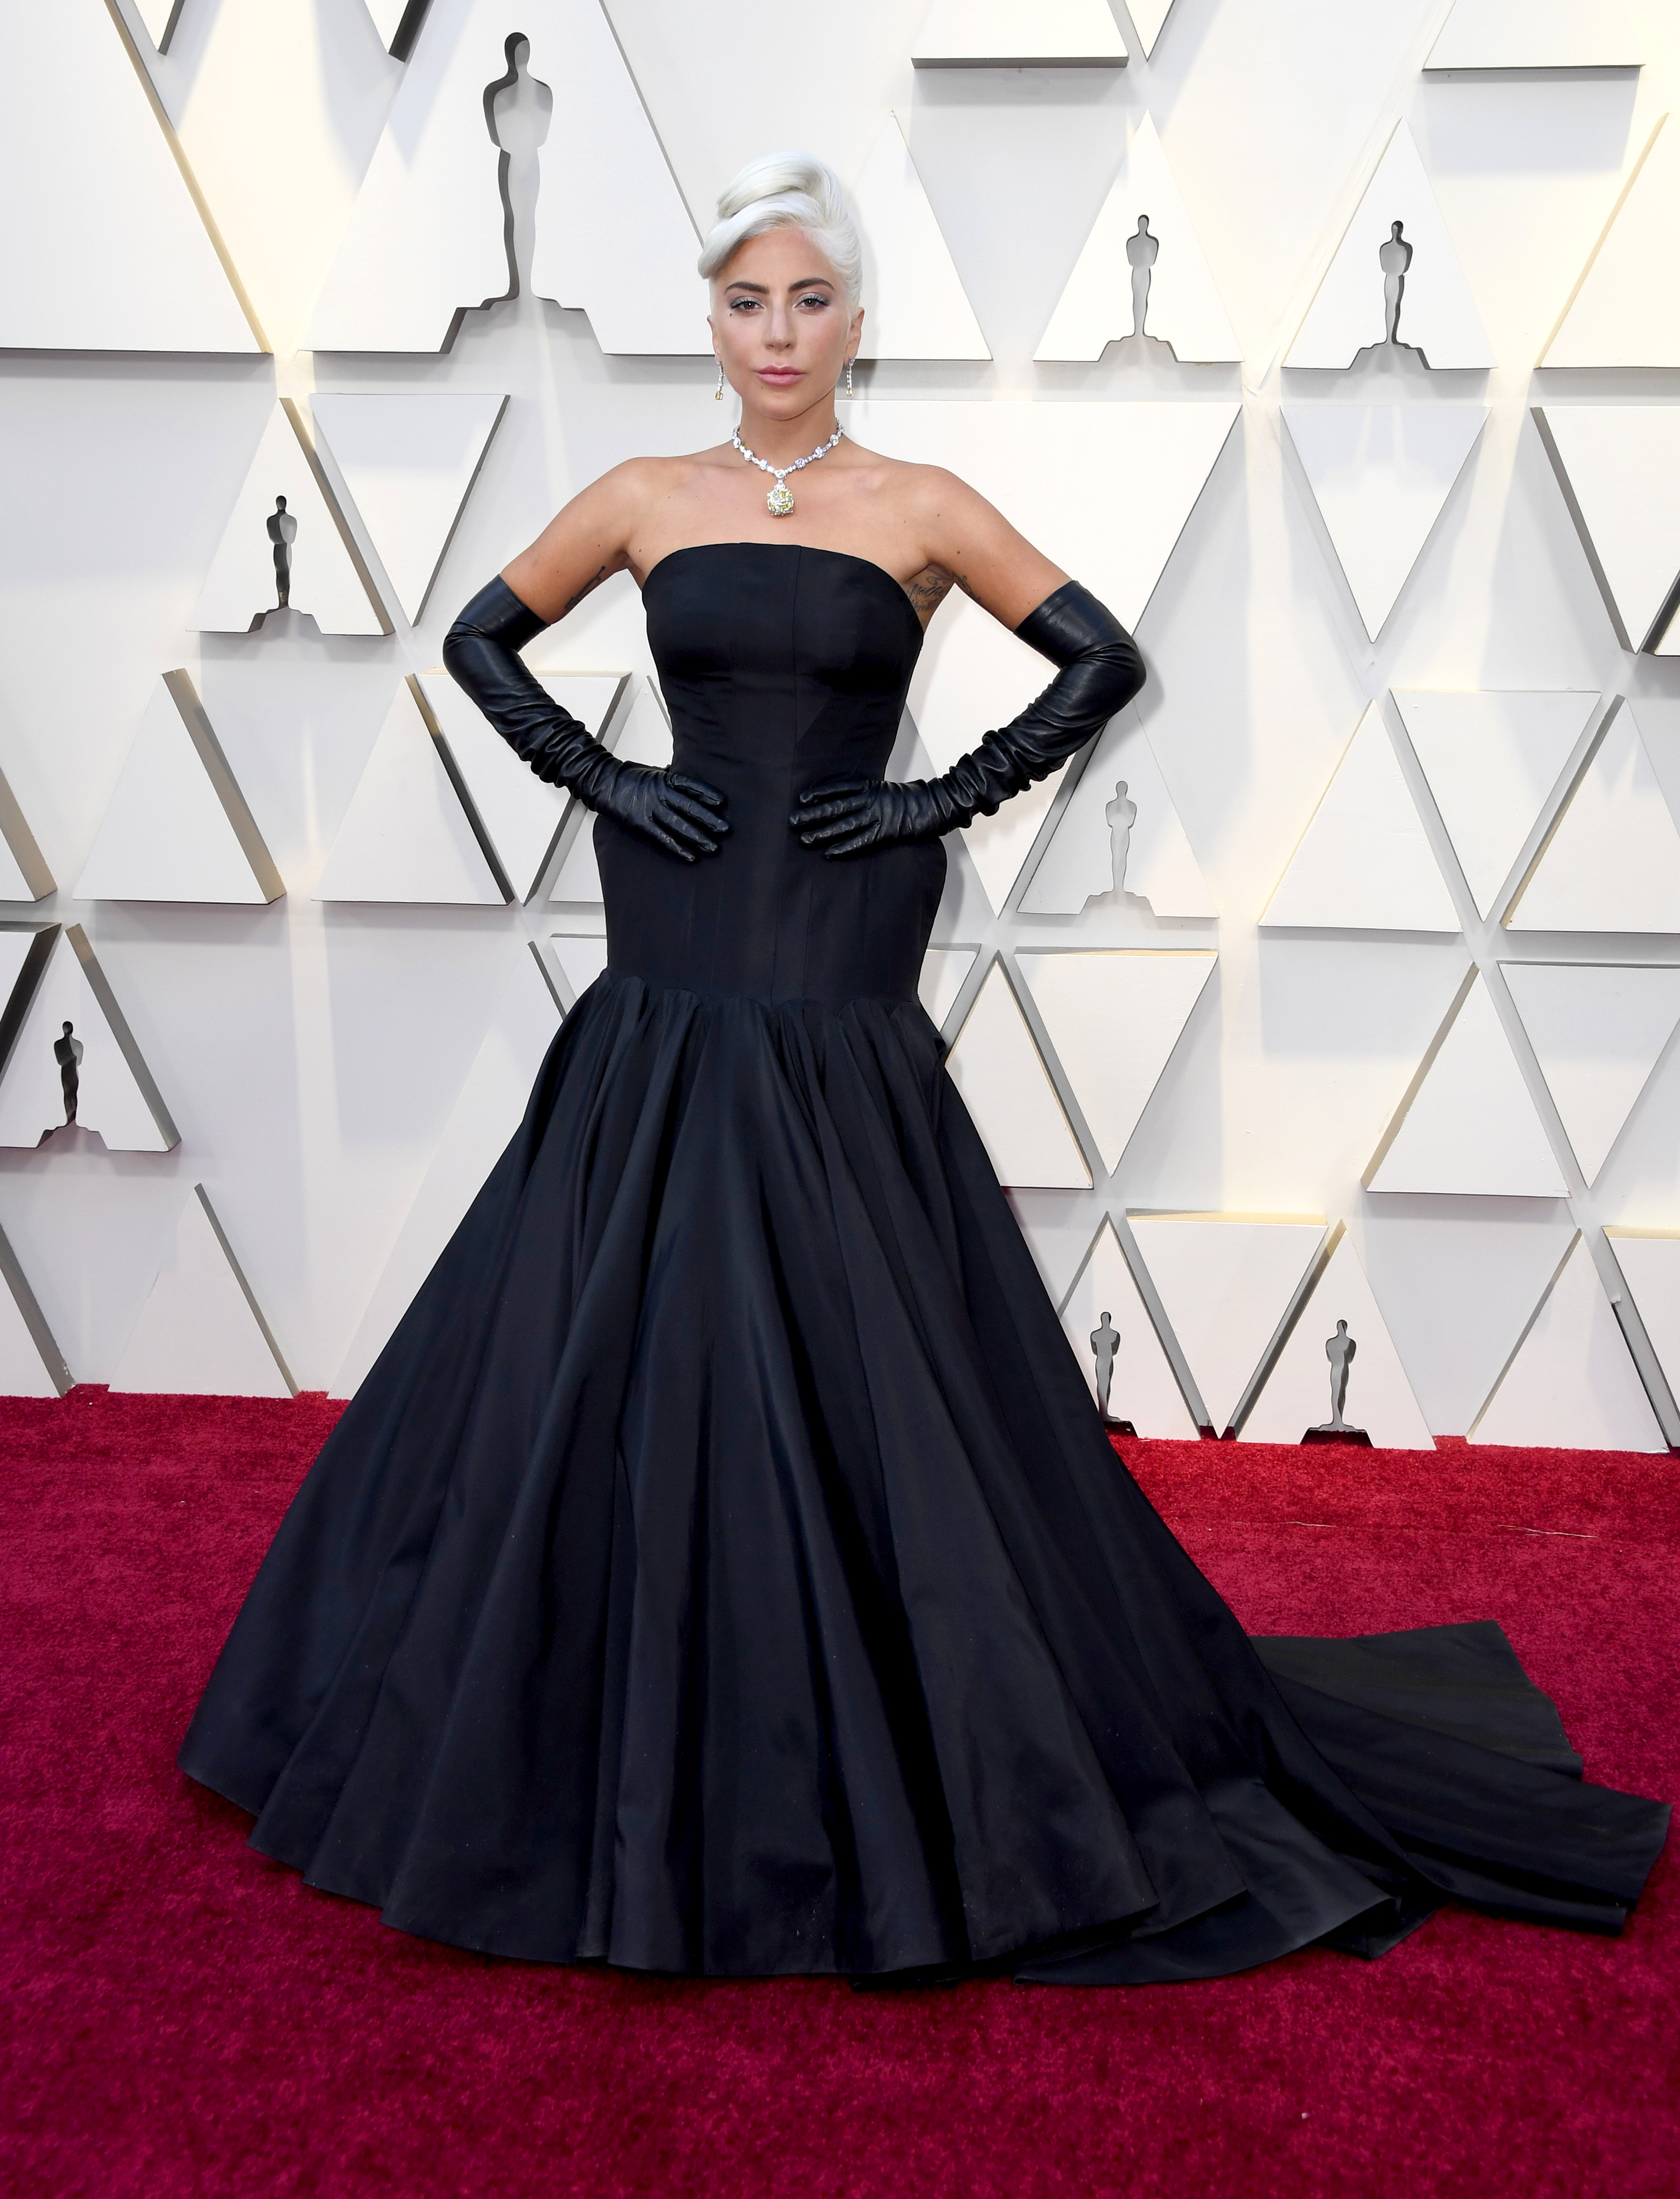 Lady Gaga in Alexander McQueen
(Photo by Frazer Harrison/Getty Images)